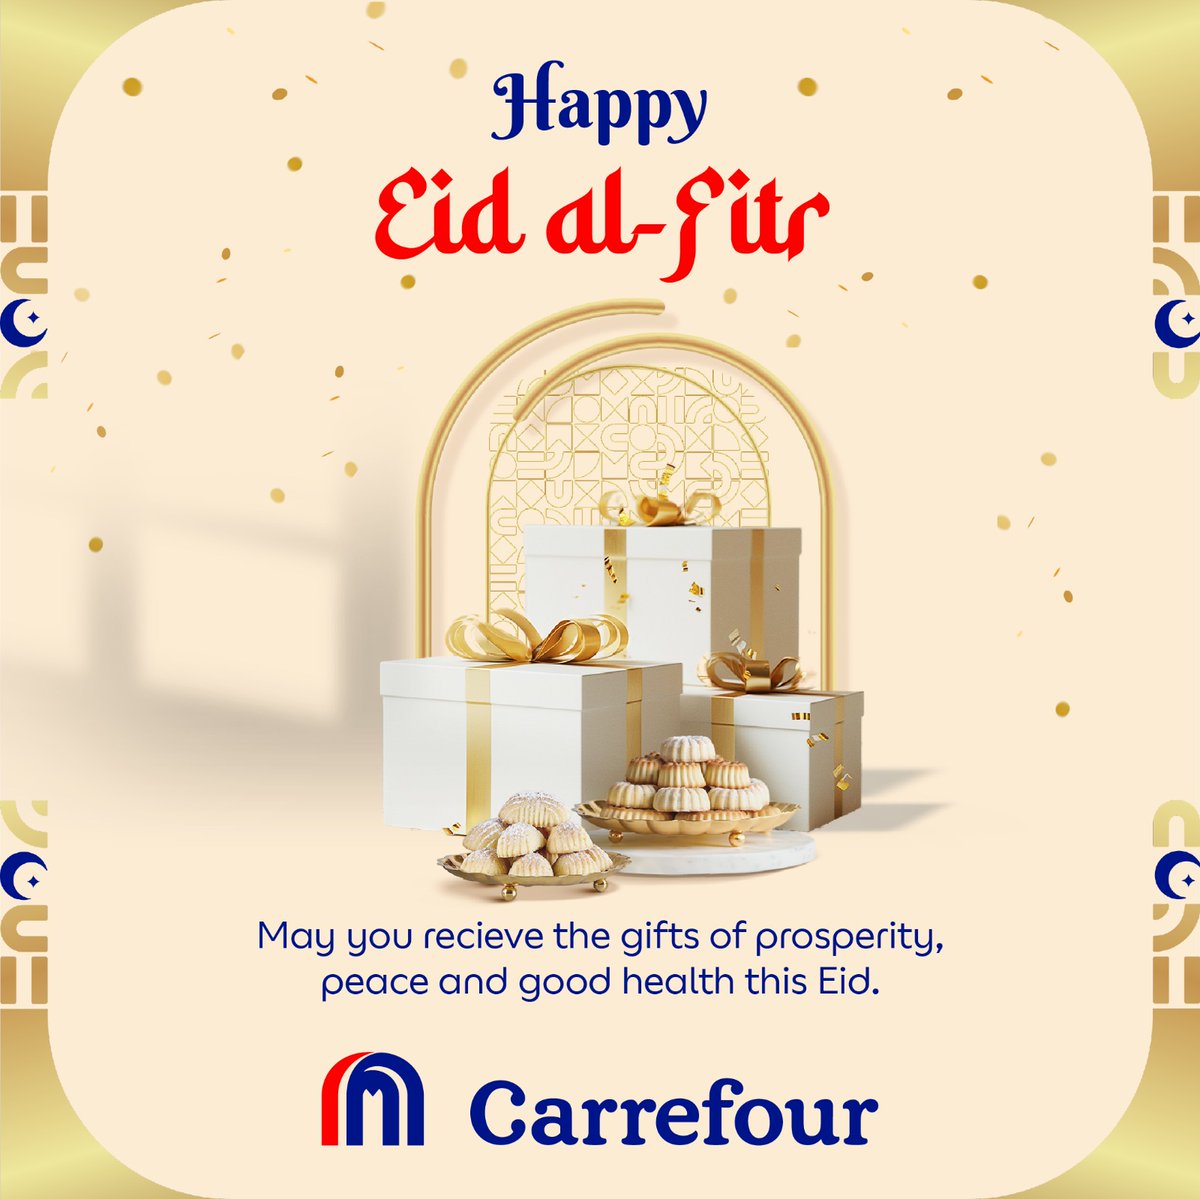 As the holy month of Ramadan comes to a close, may the spirit of Eid fill your hearts with joy, peace, and prosperity. Wishing you and your loved ones a blessed Eid Al-Fitr filled with happiness, and cherished moments. #CarrefourKenya #MoreForYou #GreatMoments @MajidAlFuttaim